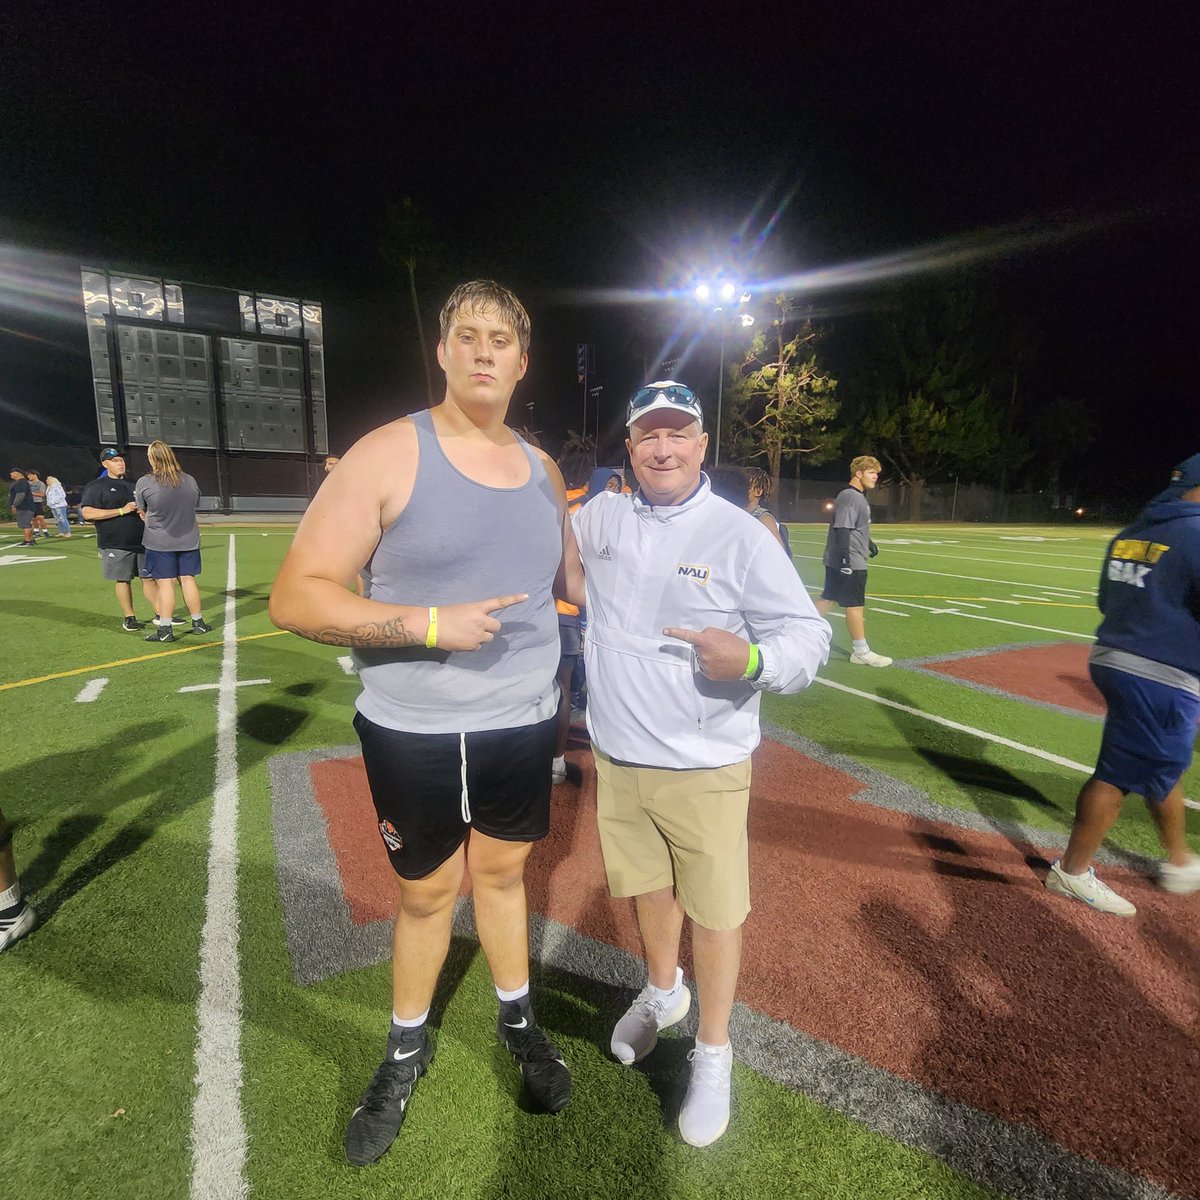 @AshdonWnetrzak with the Head Coach @CoachBall from @NAU_Football right after receiving his offer. Thank you Coach for your faith in Ashdon future! @OfficialKOBros @CoachBriscoeWR @SierraCanyonFB @247Sports @GregBiggins #UniversityofRedlands #megacamp